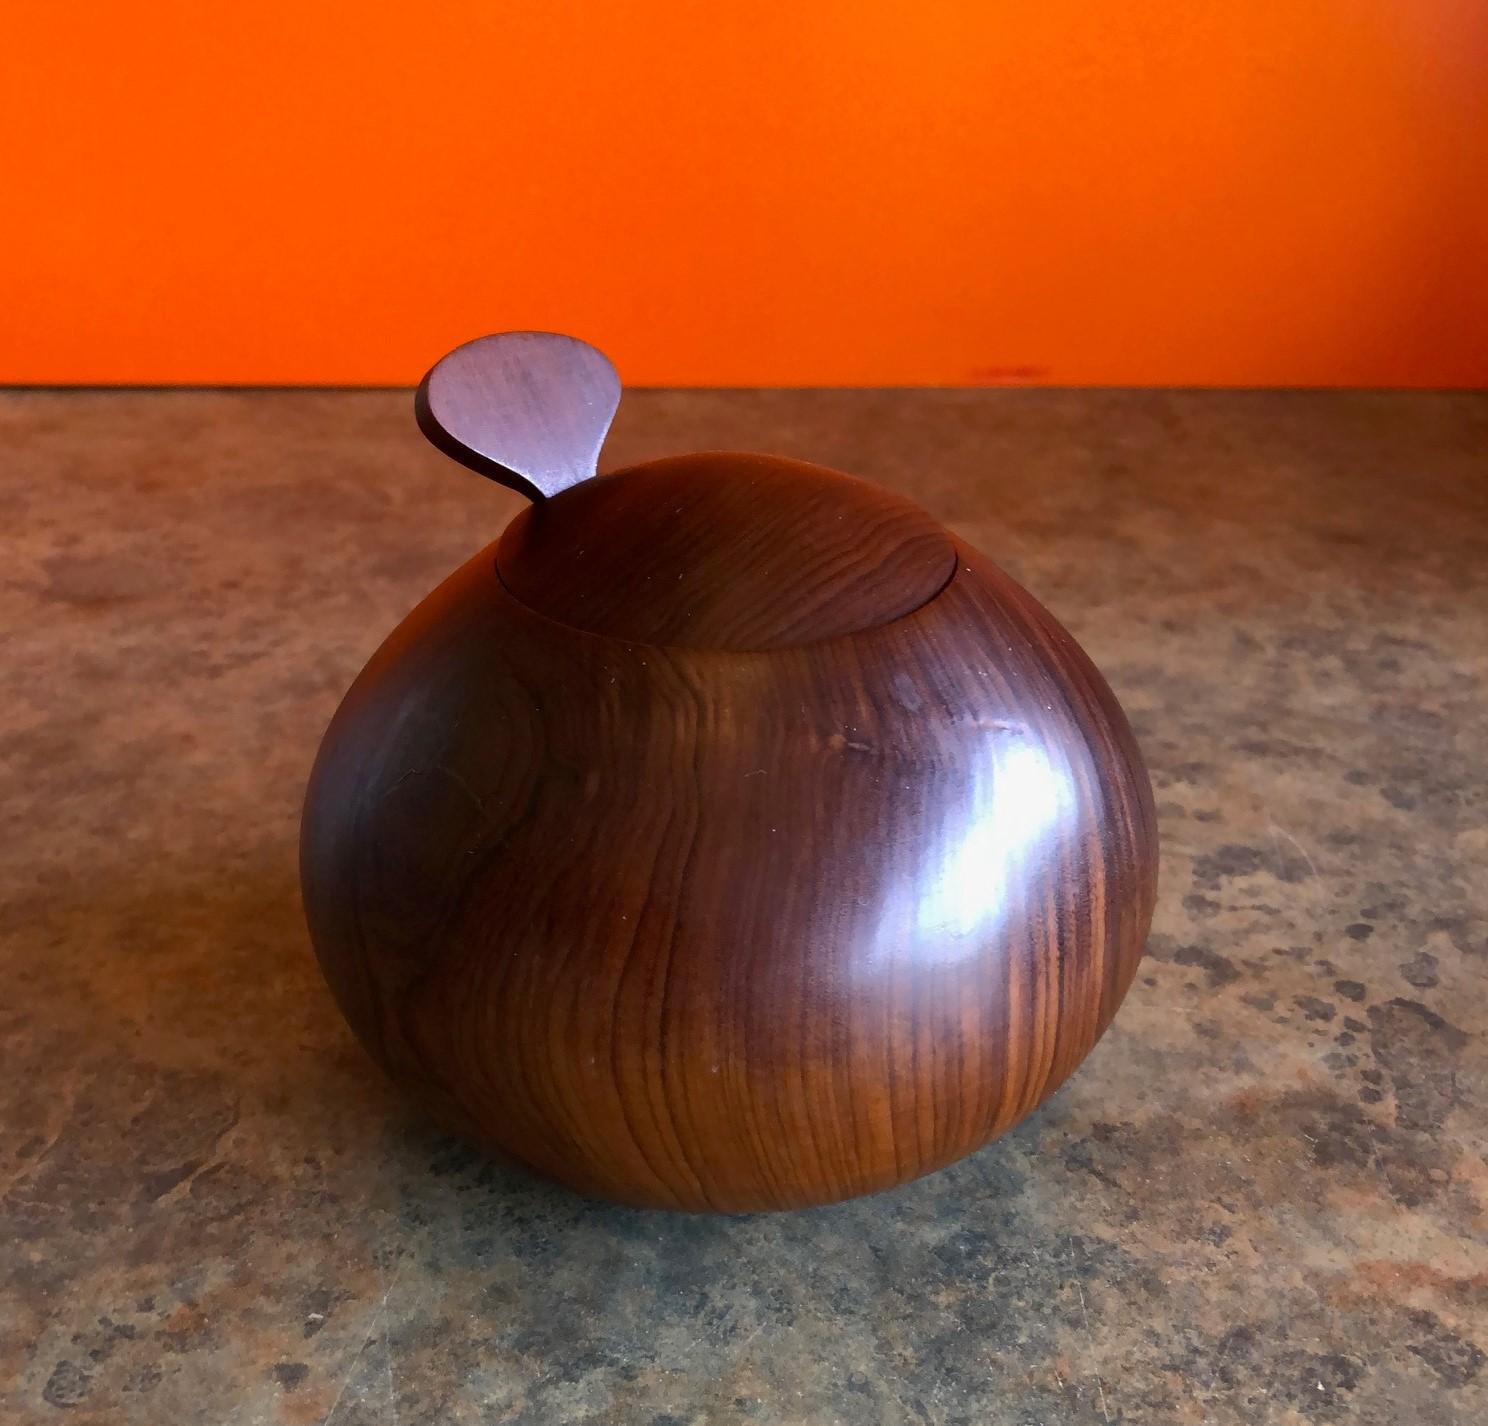 Beautiful Danish modern rosewood sugar bowl with spoon and lid, circa 1970's. The bowl measures 3